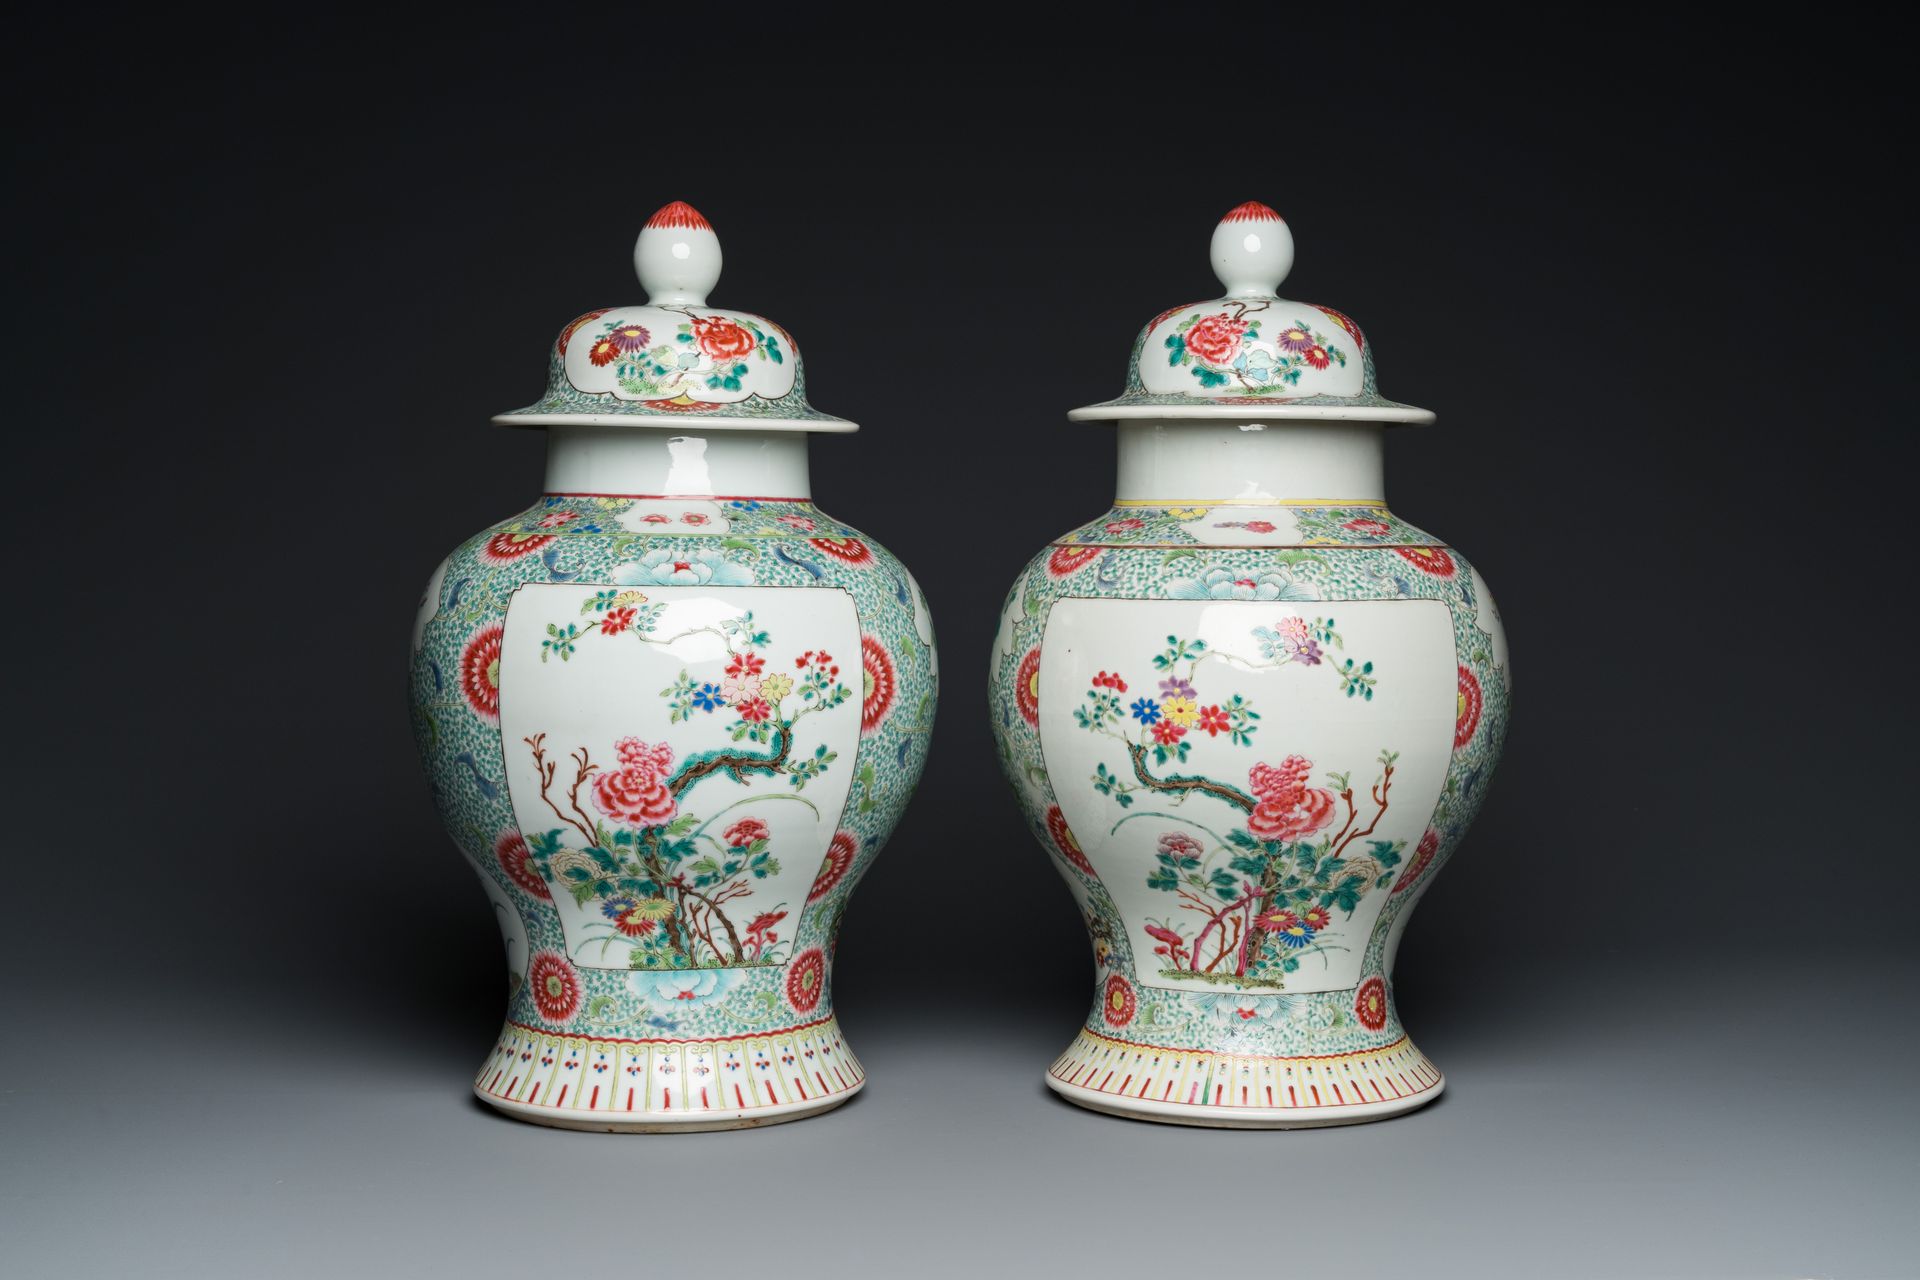 A pair of Chinese famille rose vases and covers, 19th C. 全标题。一对中国粉彩花瓶和盖子，19世纪。

&hellip;